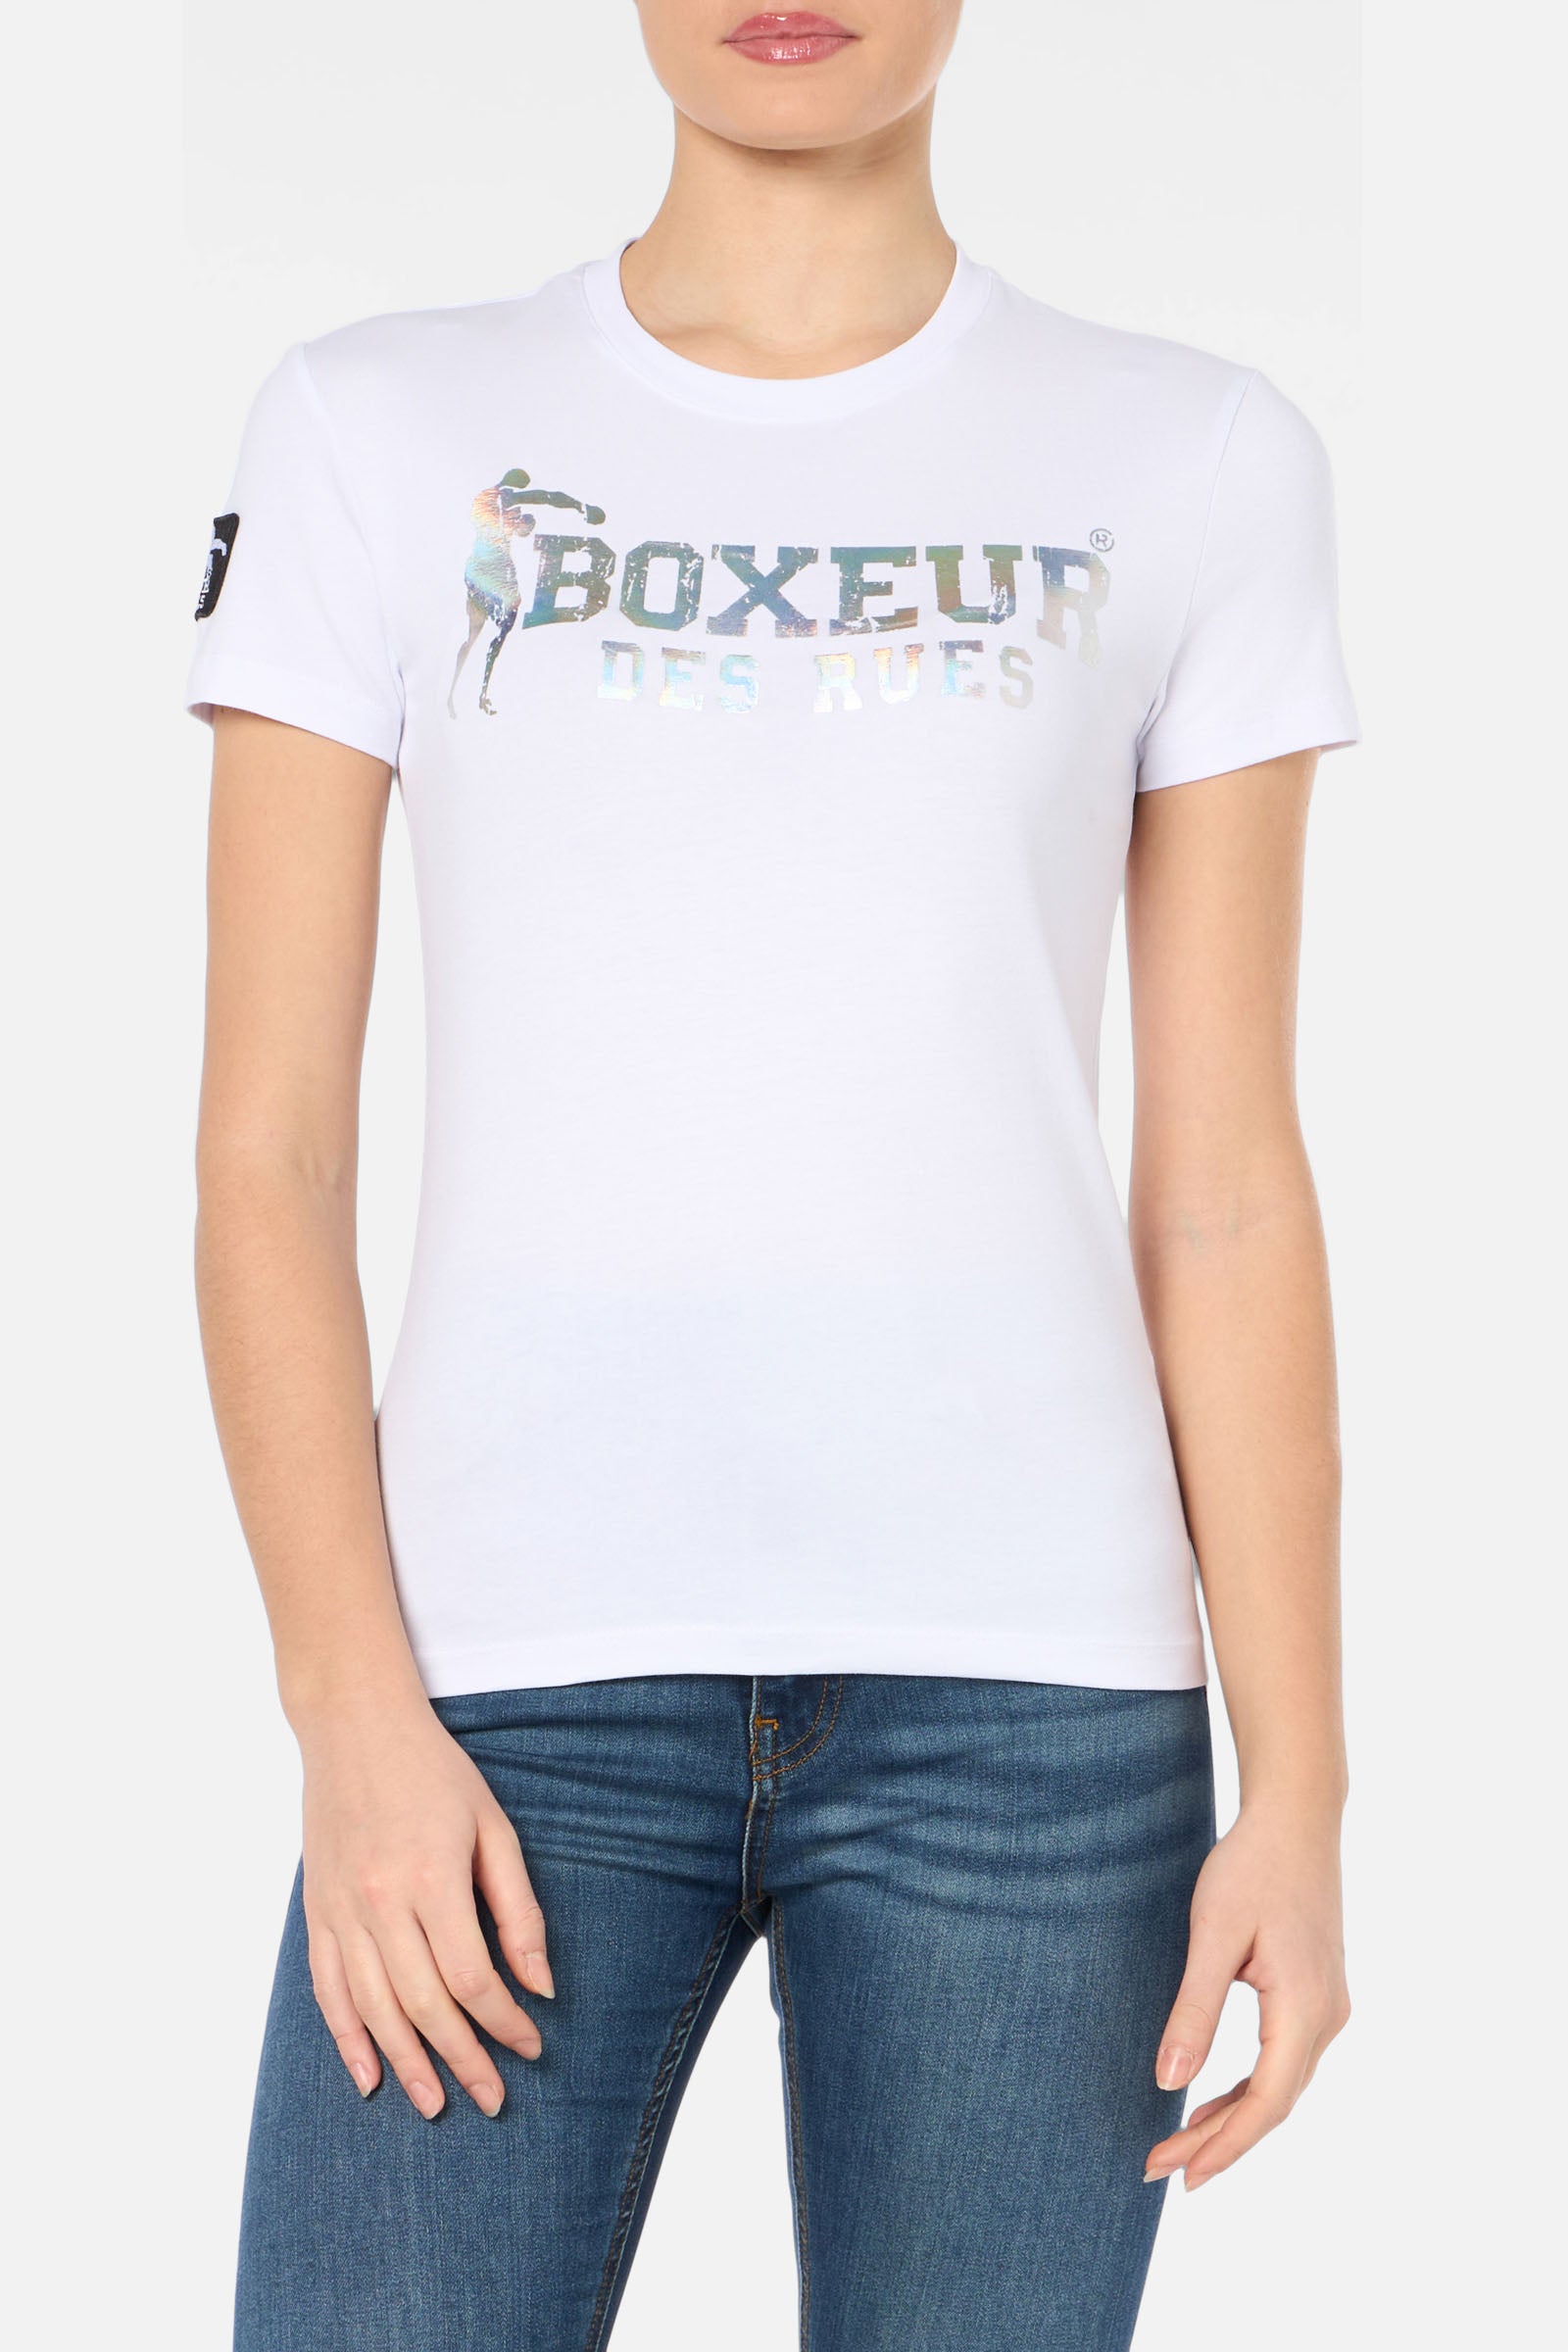 Iconic Logo Tee in White T-Shirts Boxeur des Rues   